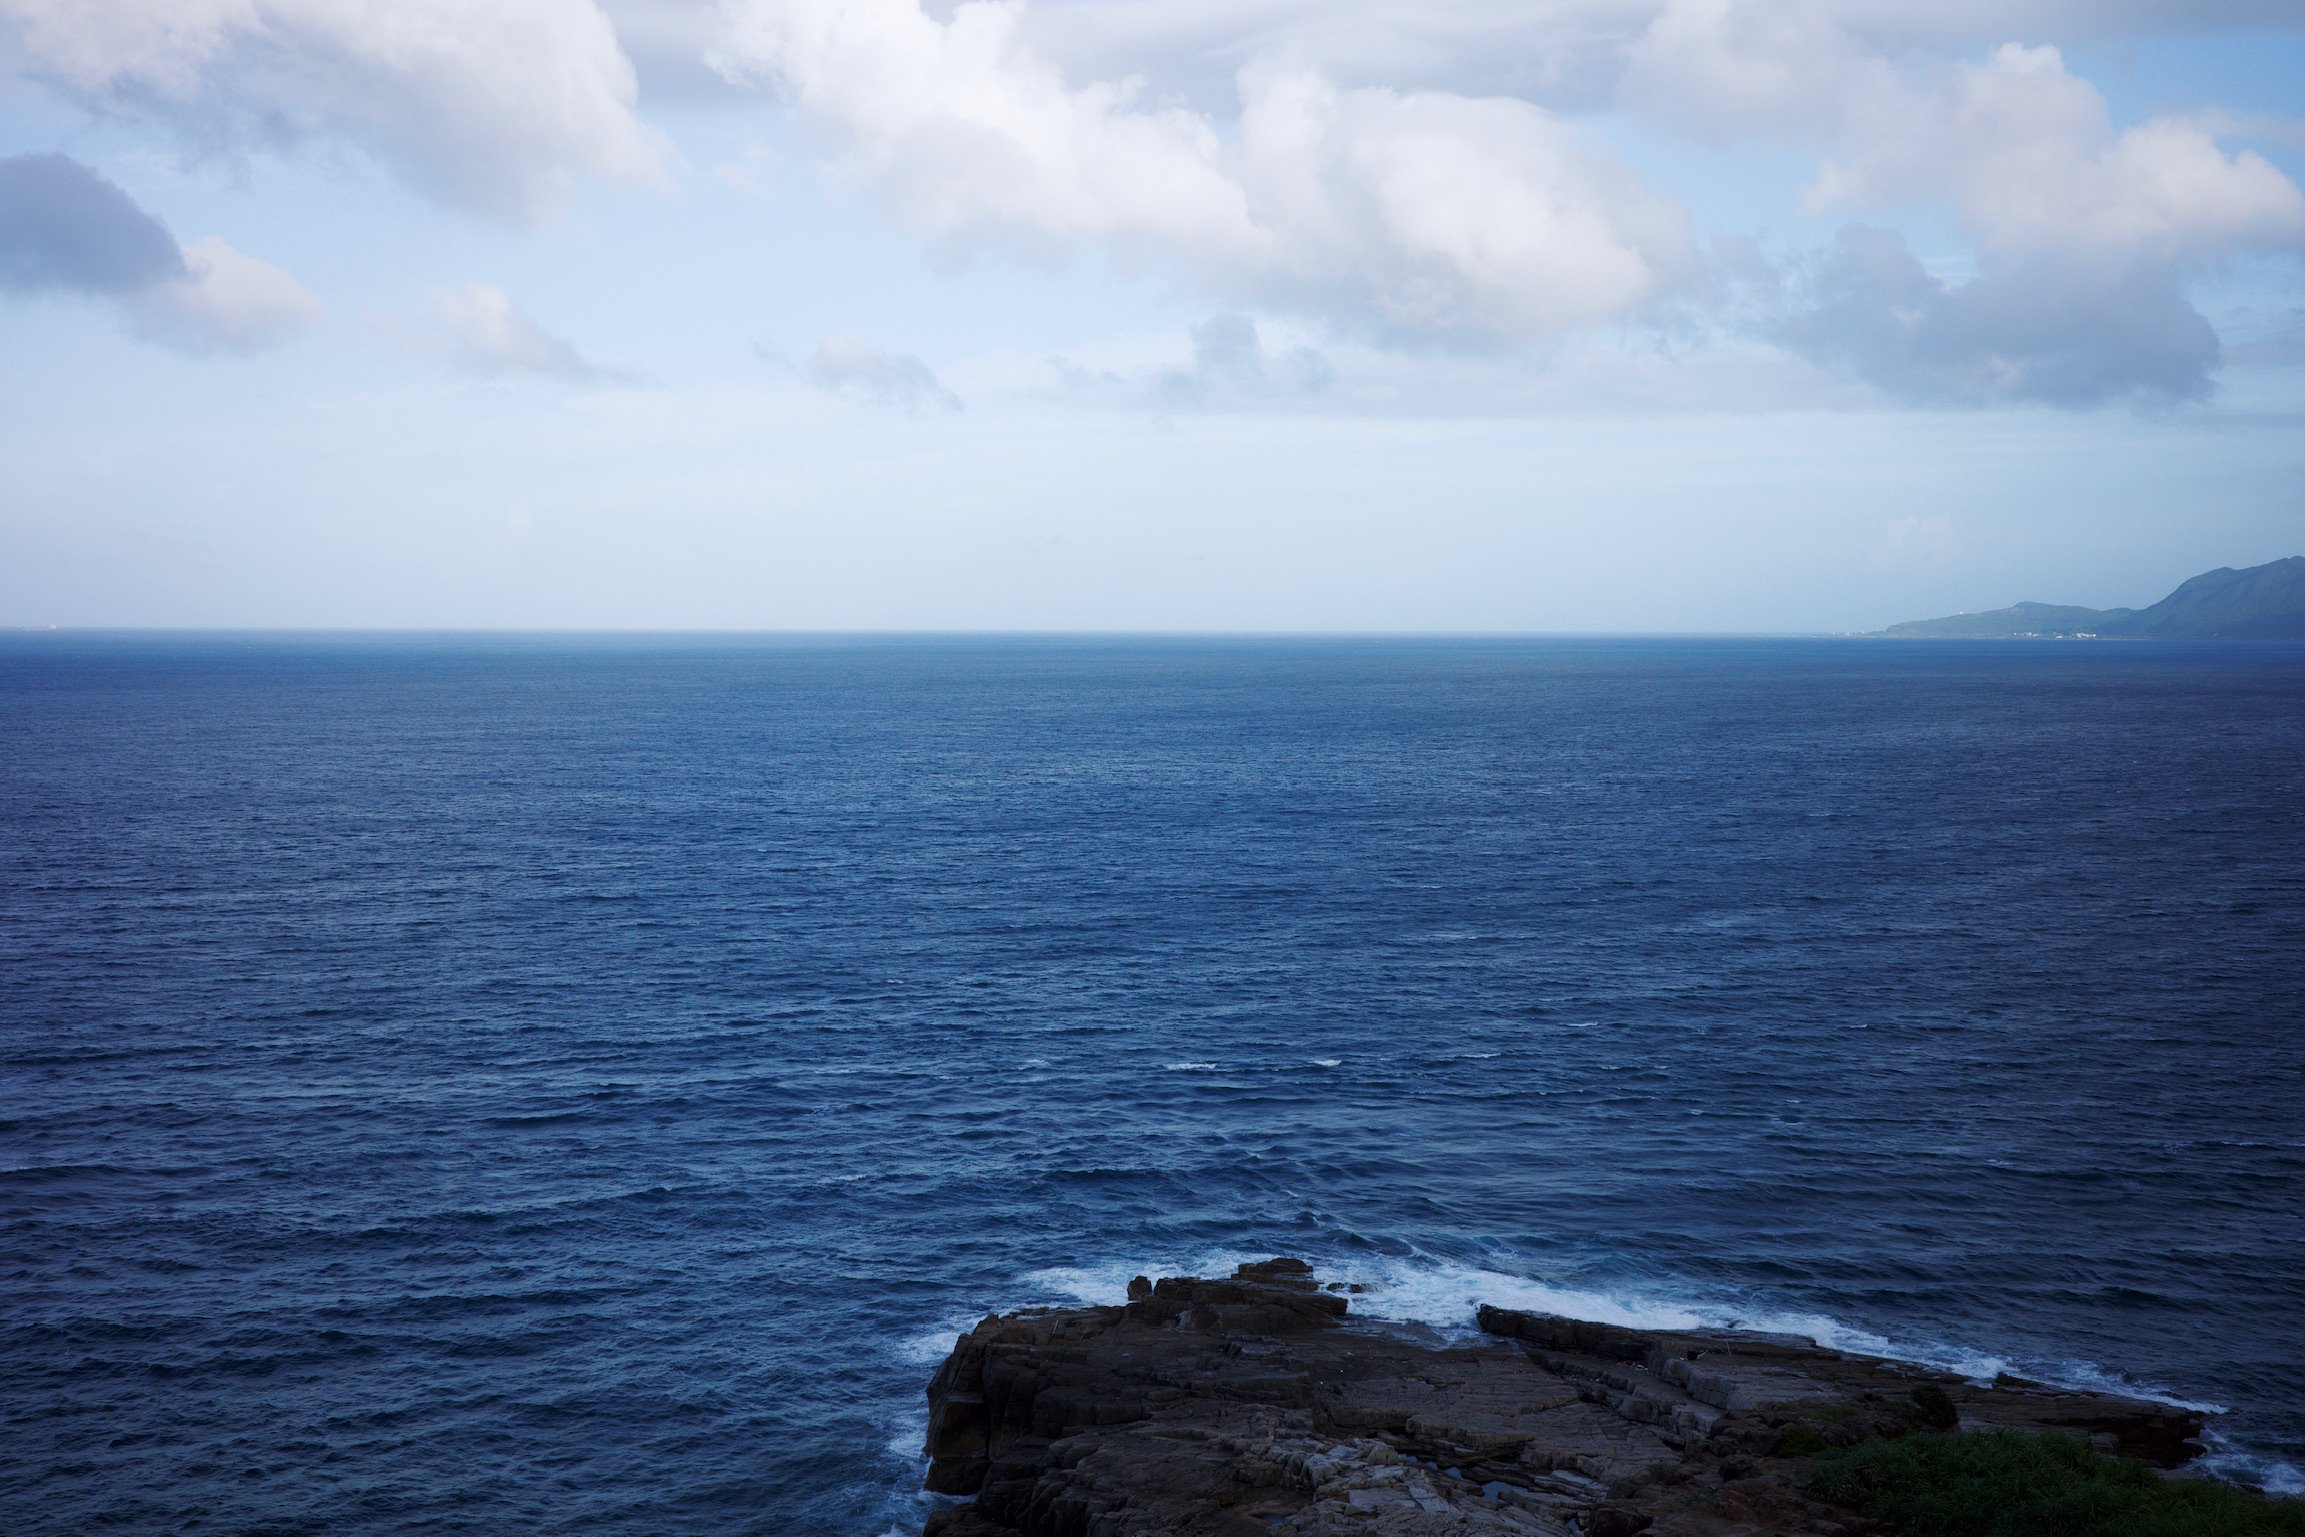 View of the East China Sea from the North East point of Taiwan. Just ocean and a blue sky.